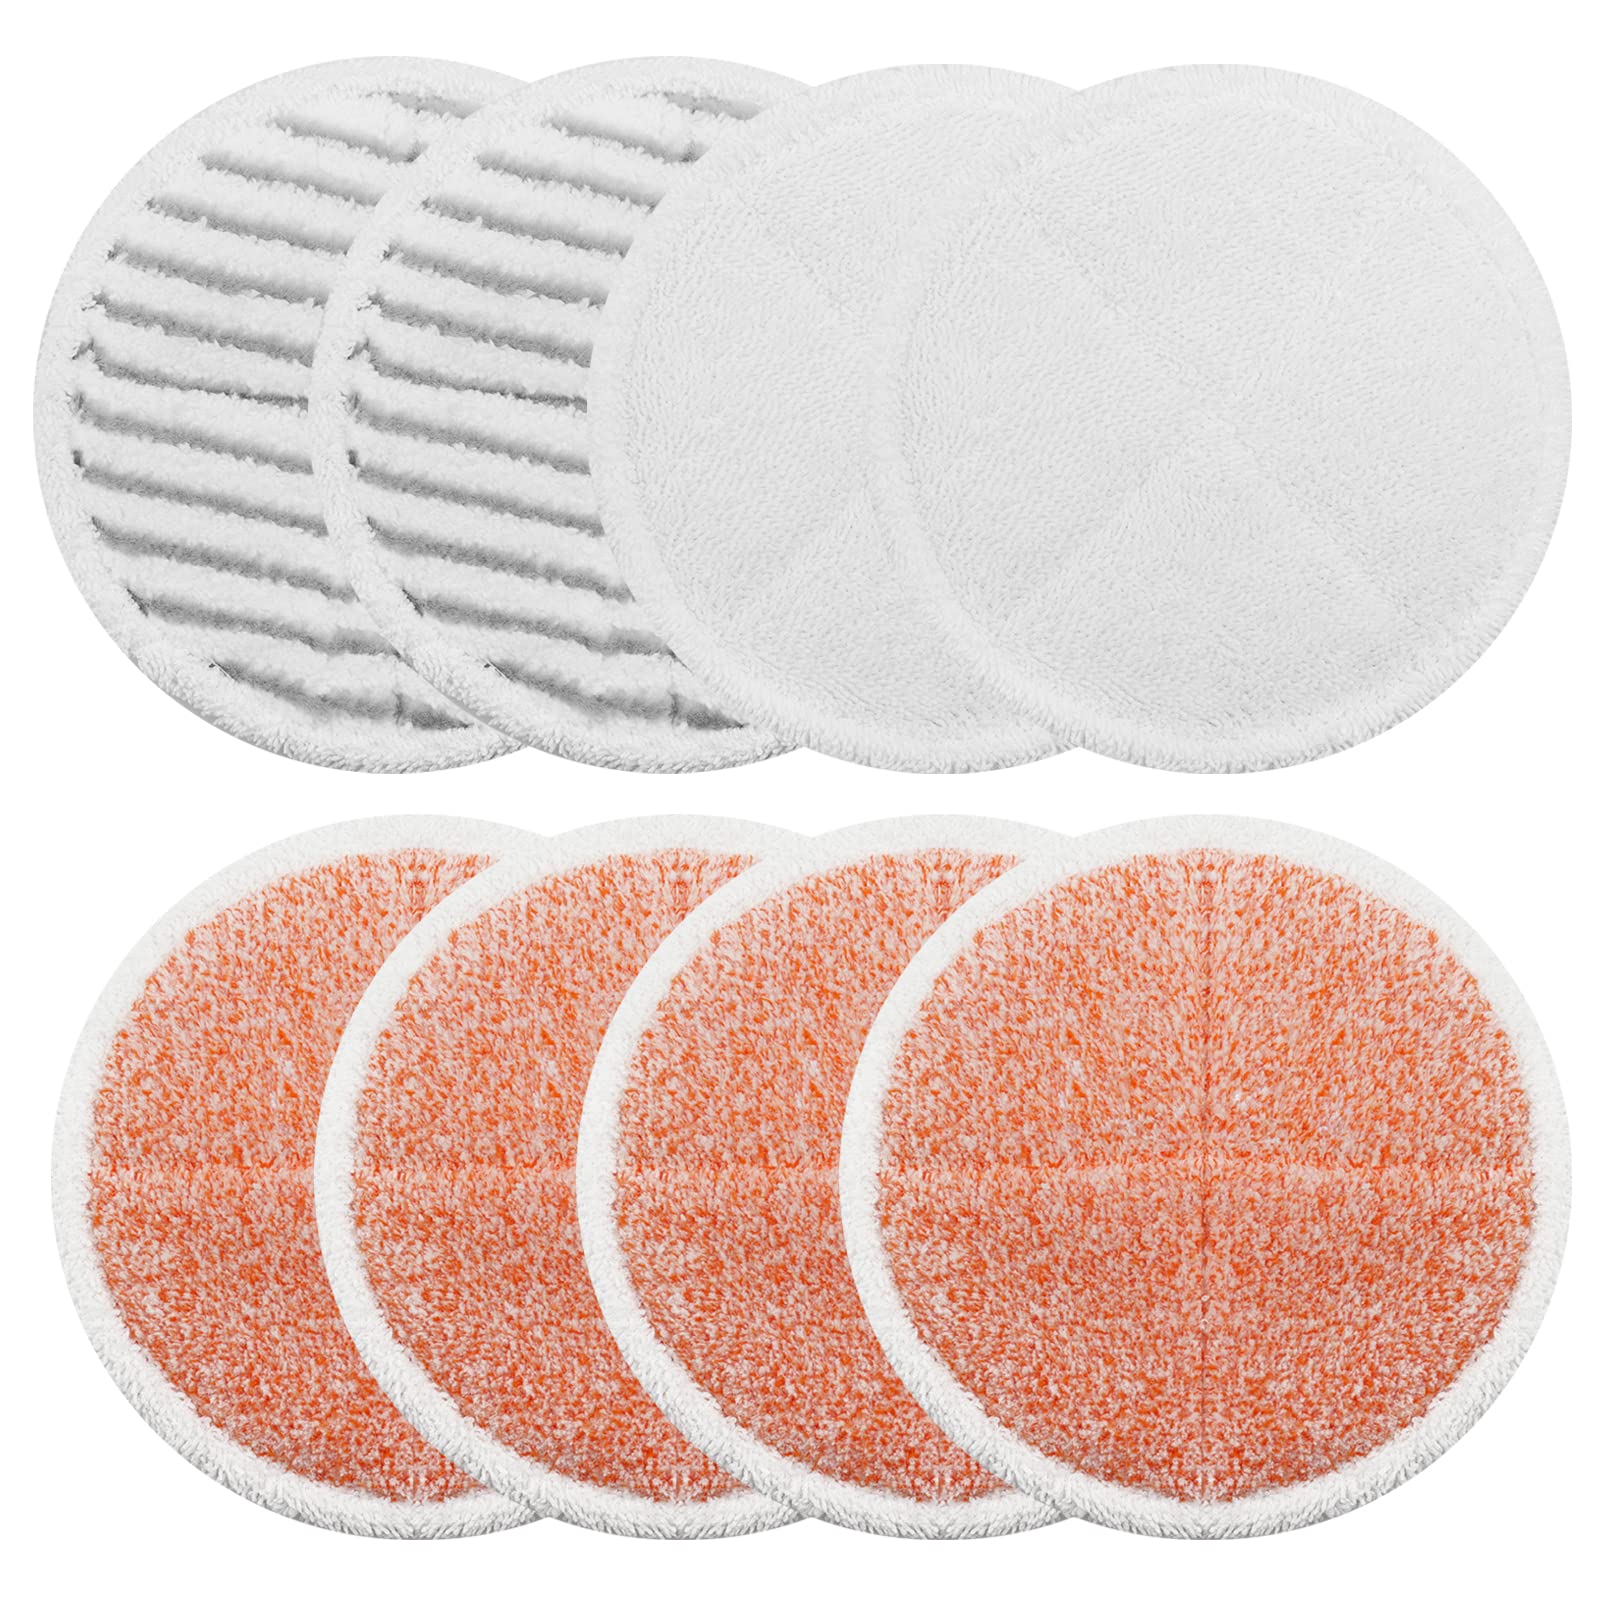 Bissell Spinwave Replacement Mop Pads Kit, Sweepers